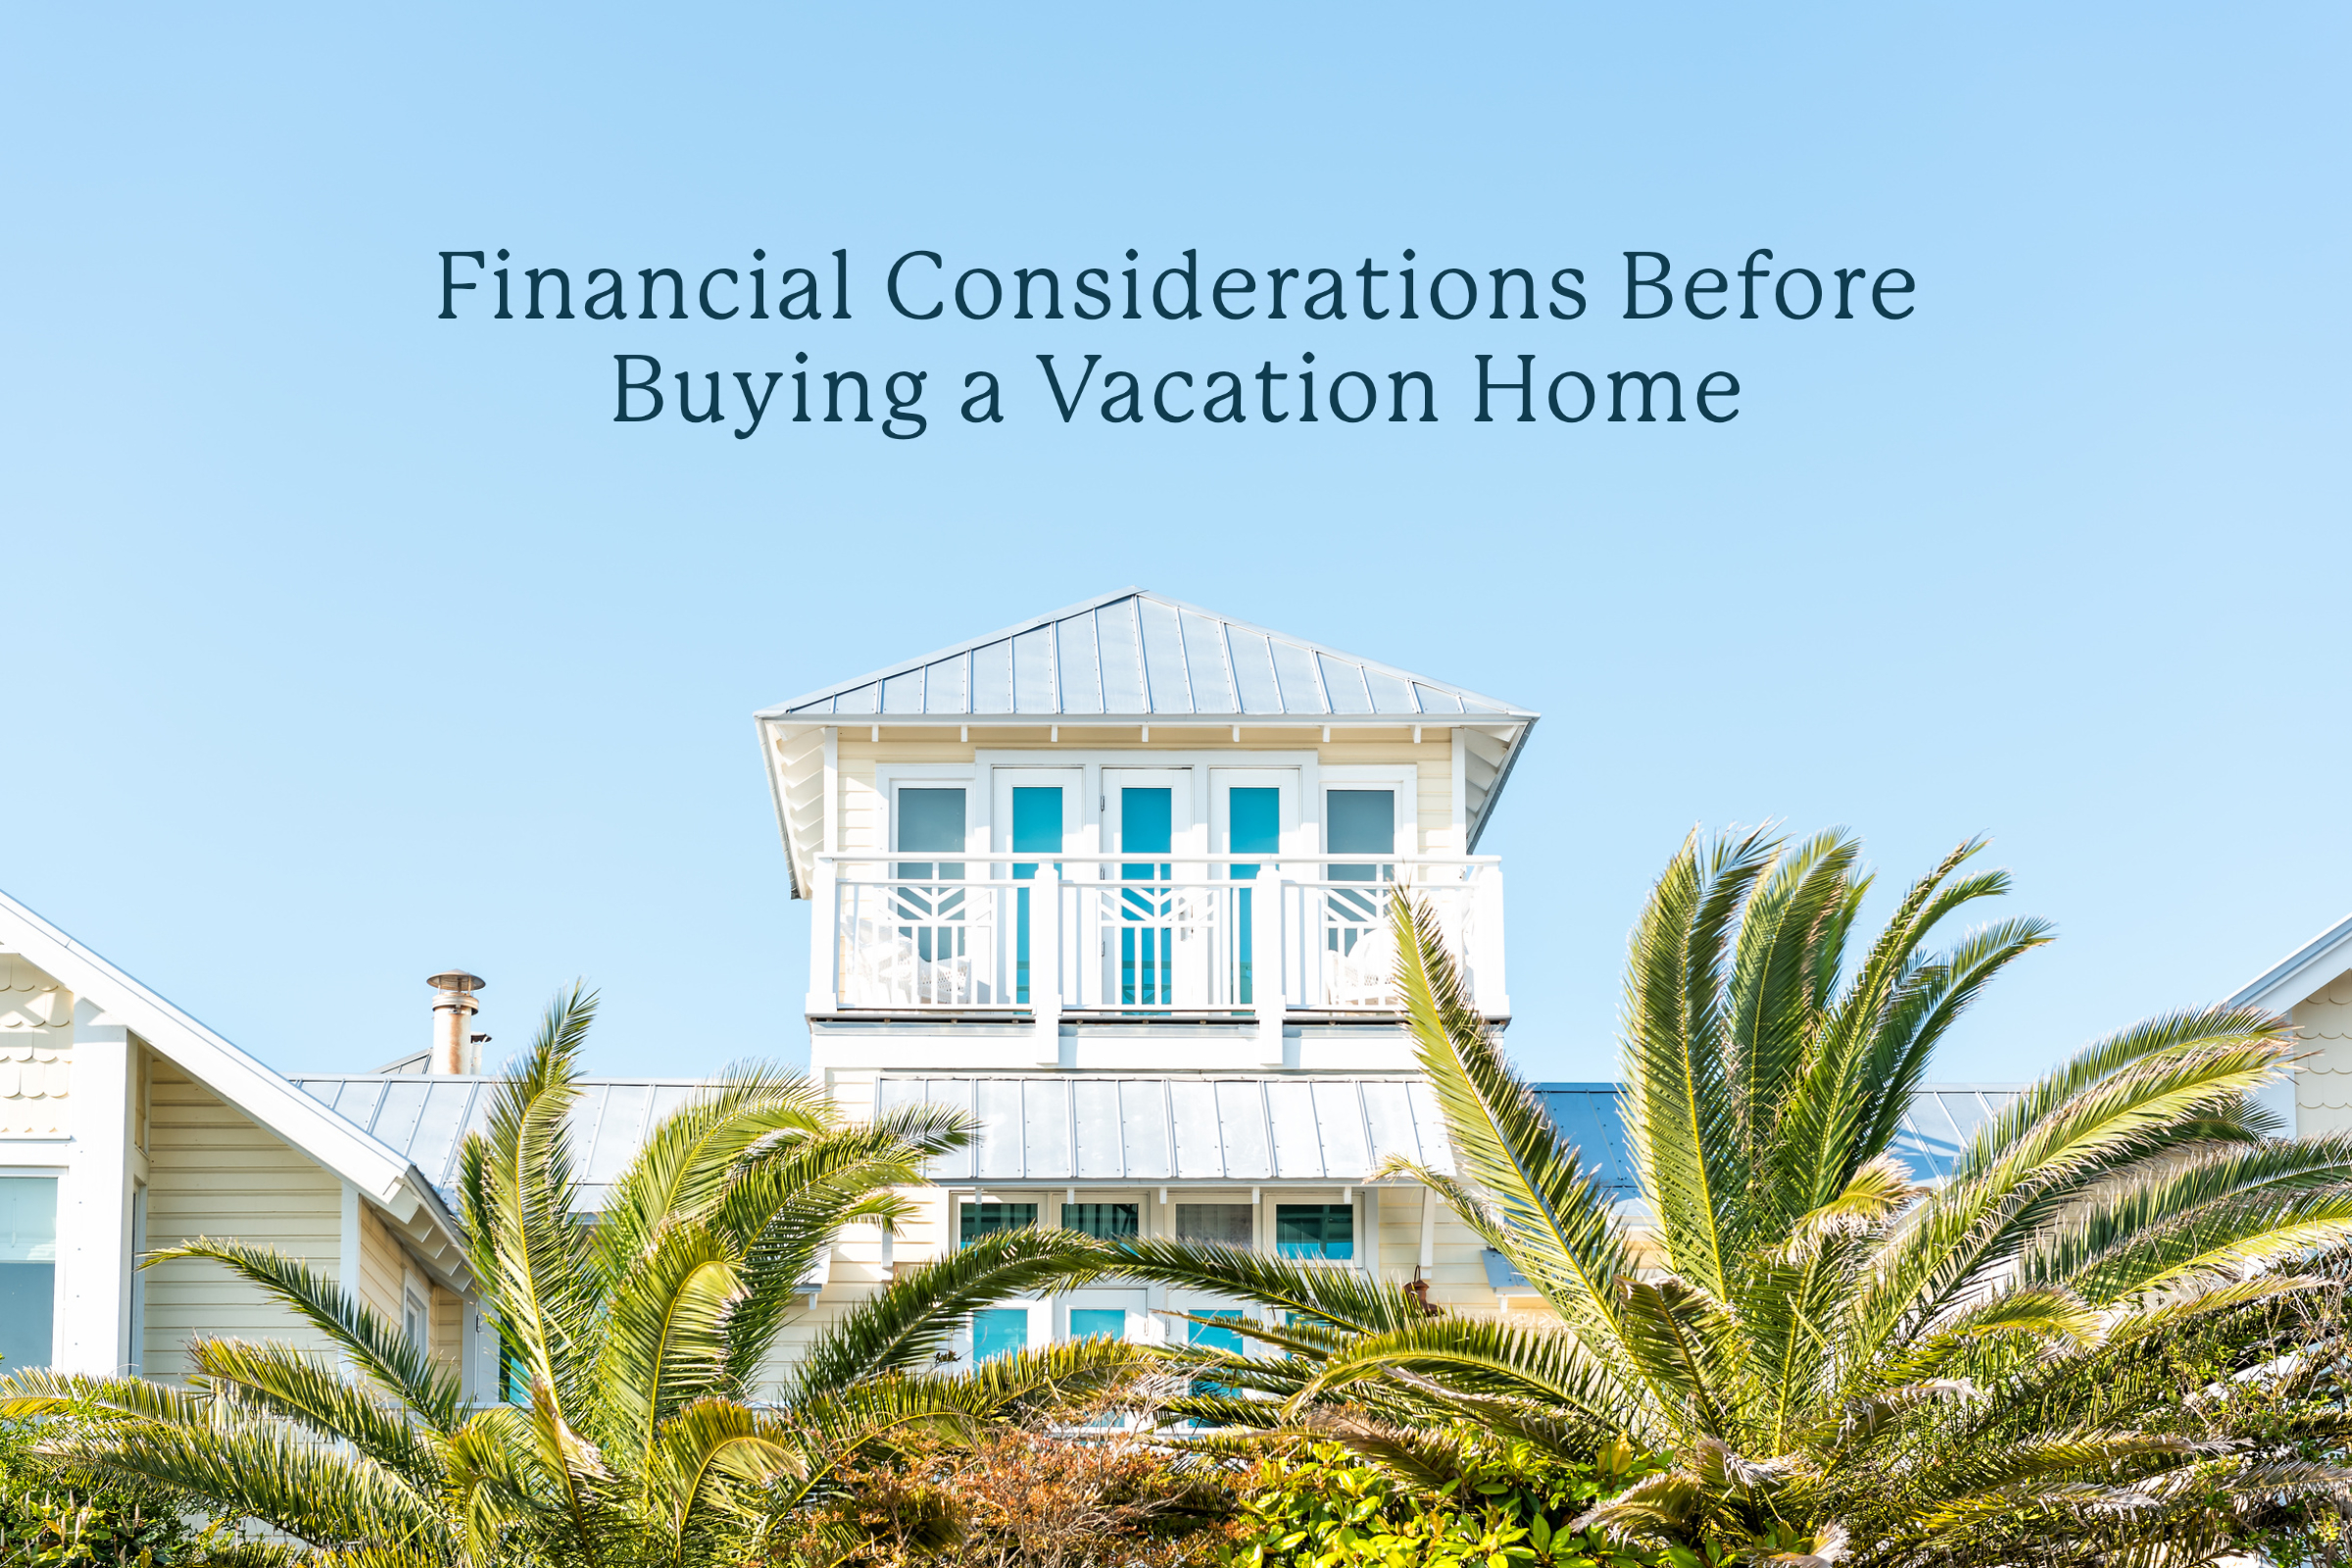 012-2022 FI 01-Financial Considerations Before Buying a Vacation Home-1